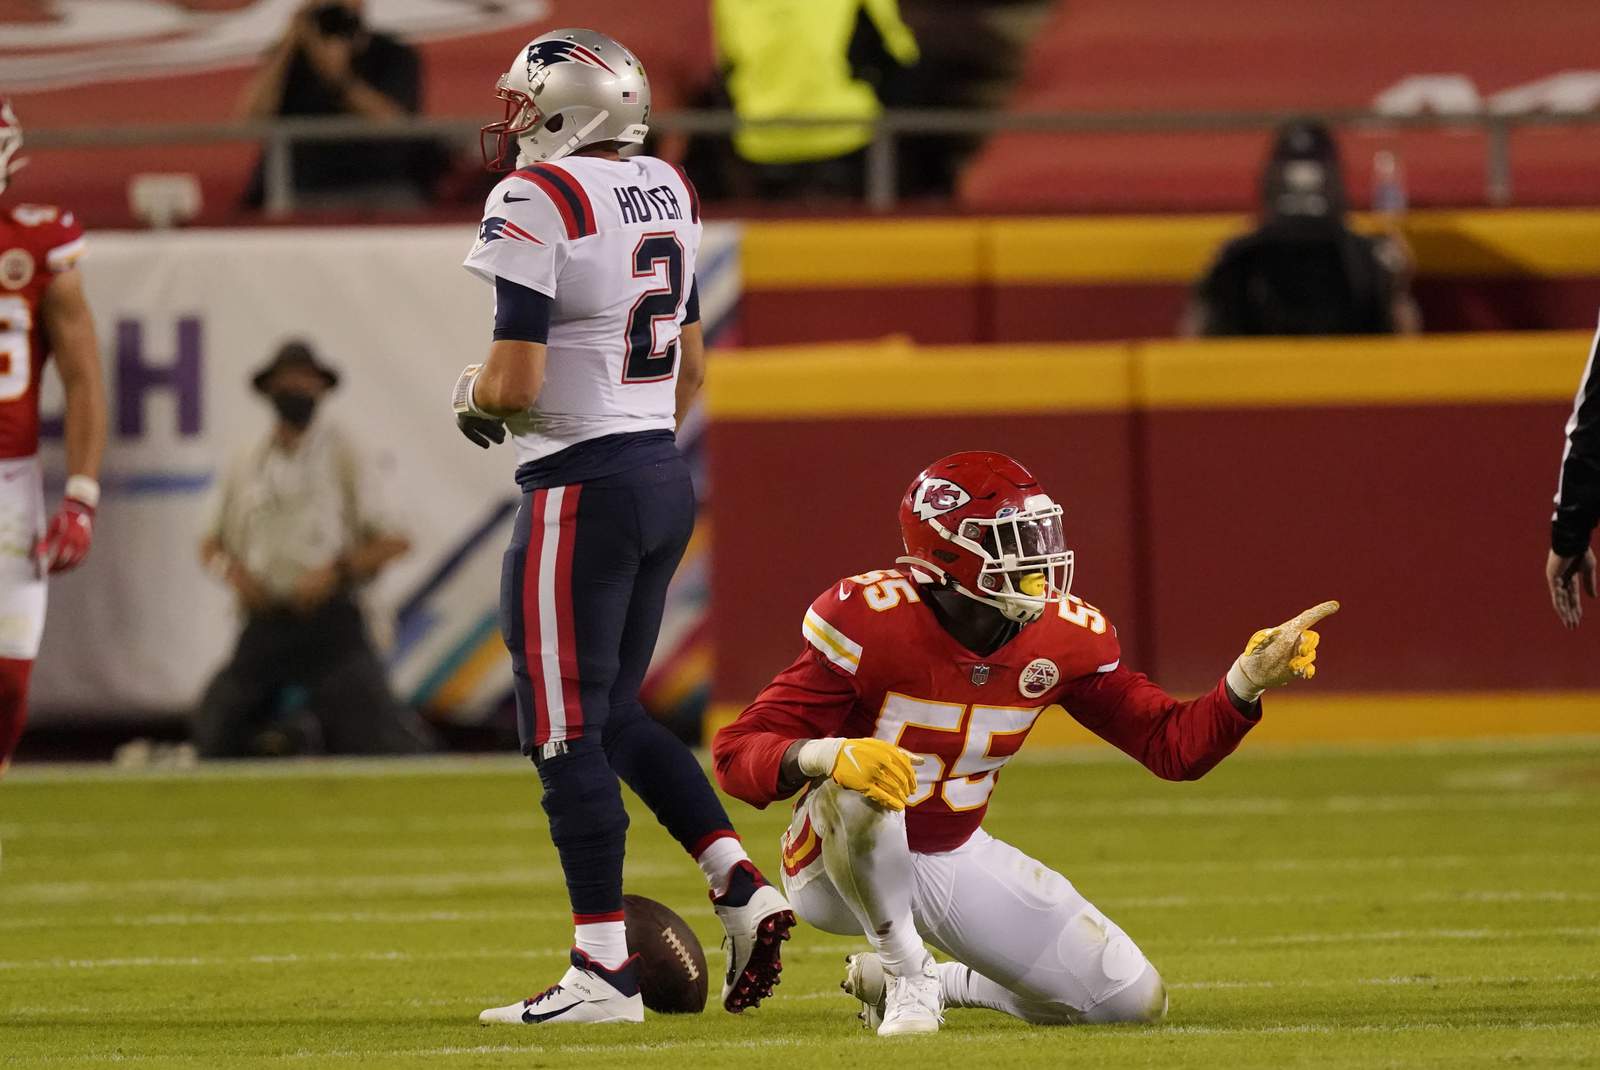 Chiefs lean on D to beat Pats 26-10 in COVID-19-delayed game